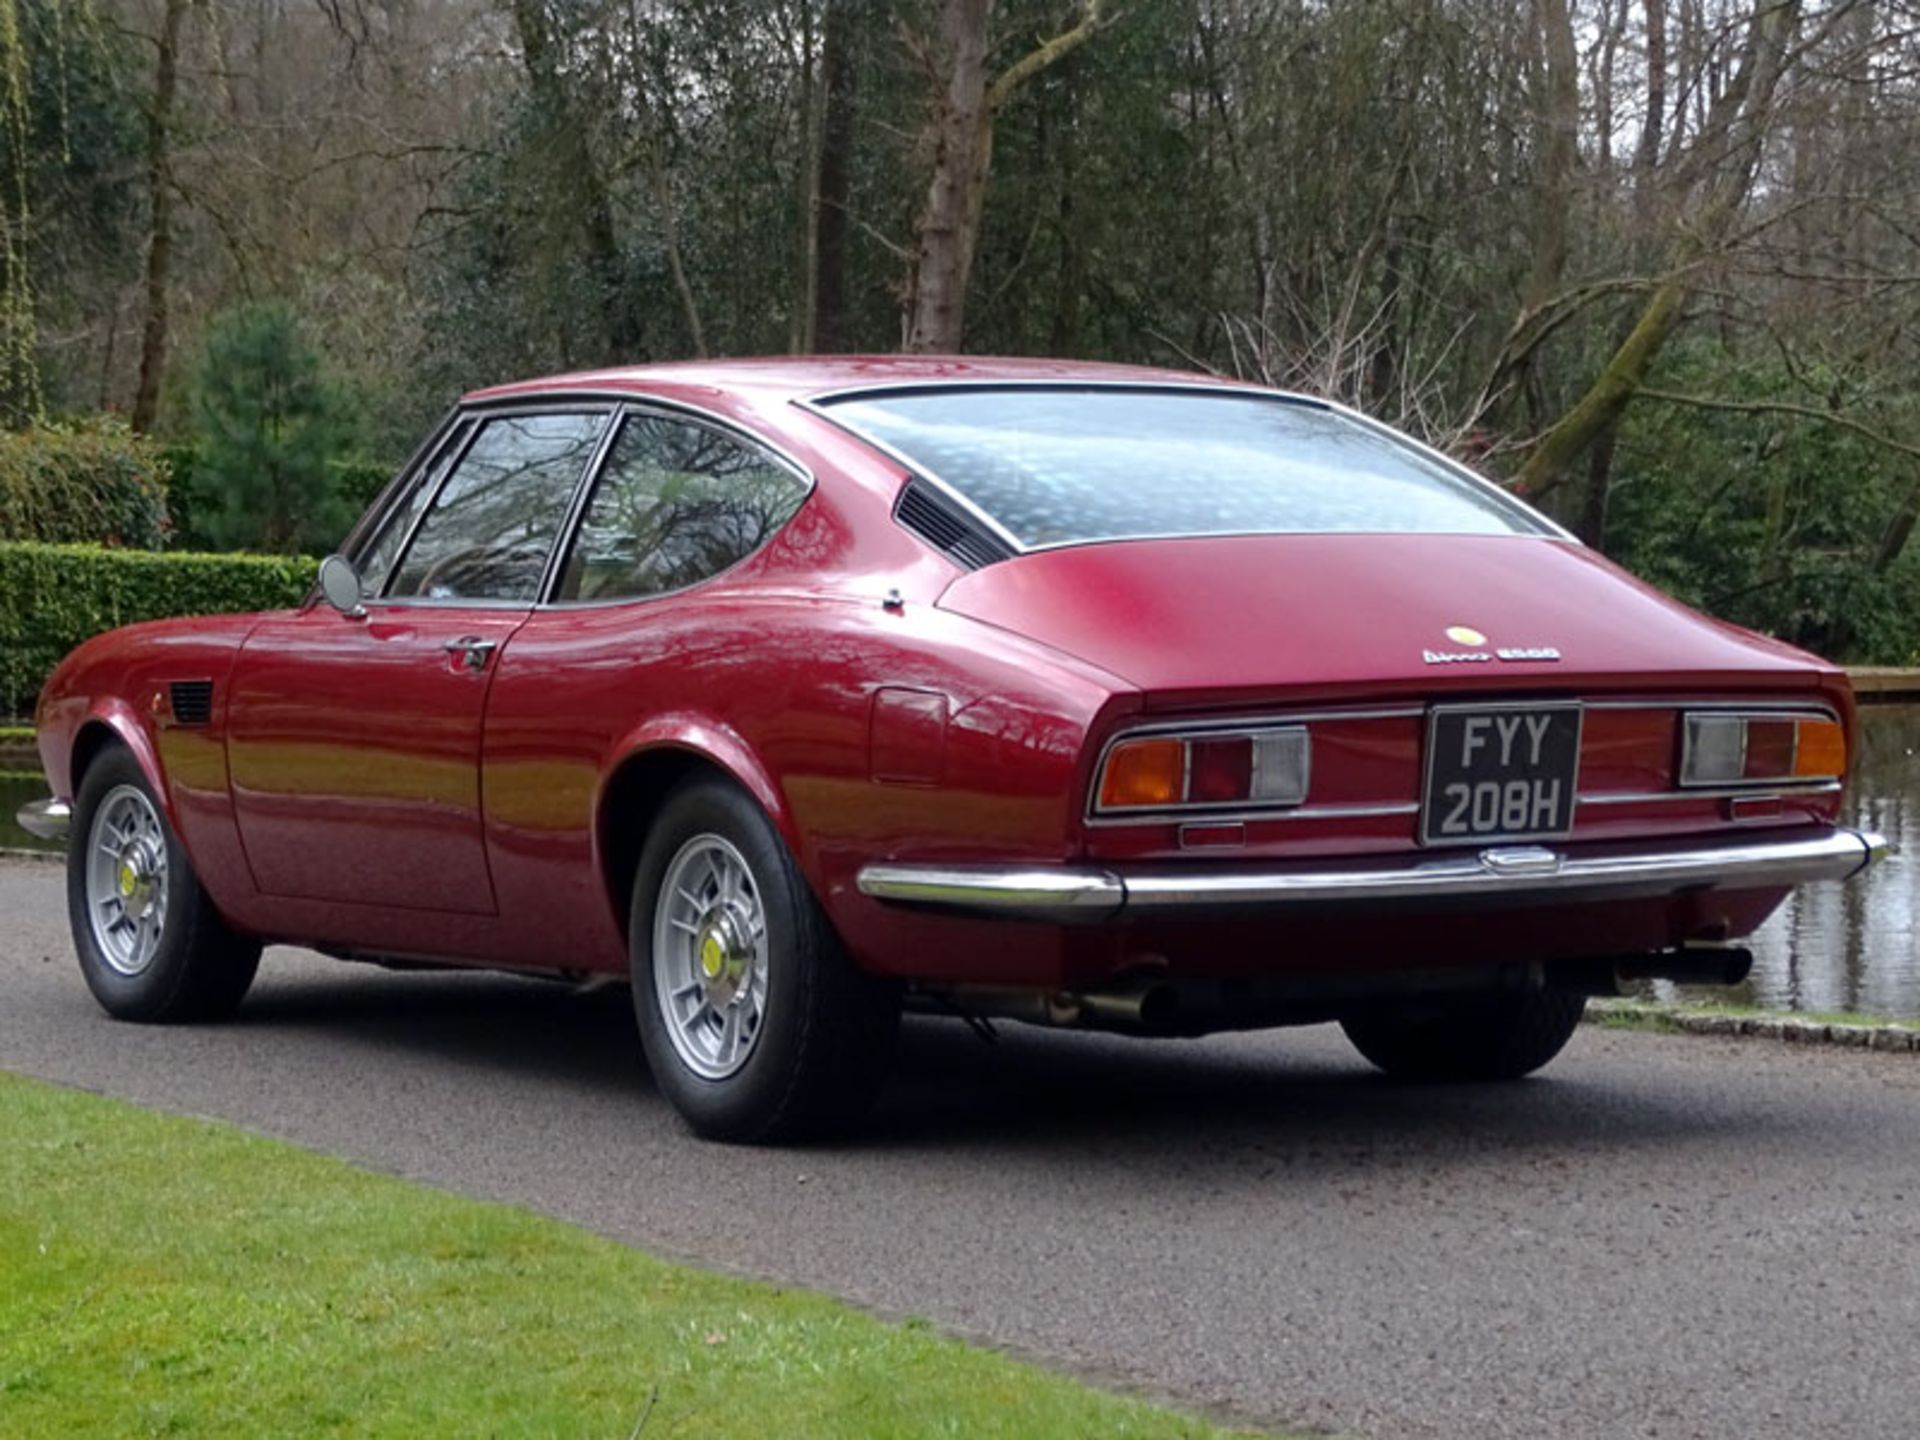 1969 Fiat Dino 2400 Coupe - Image 4 of 13